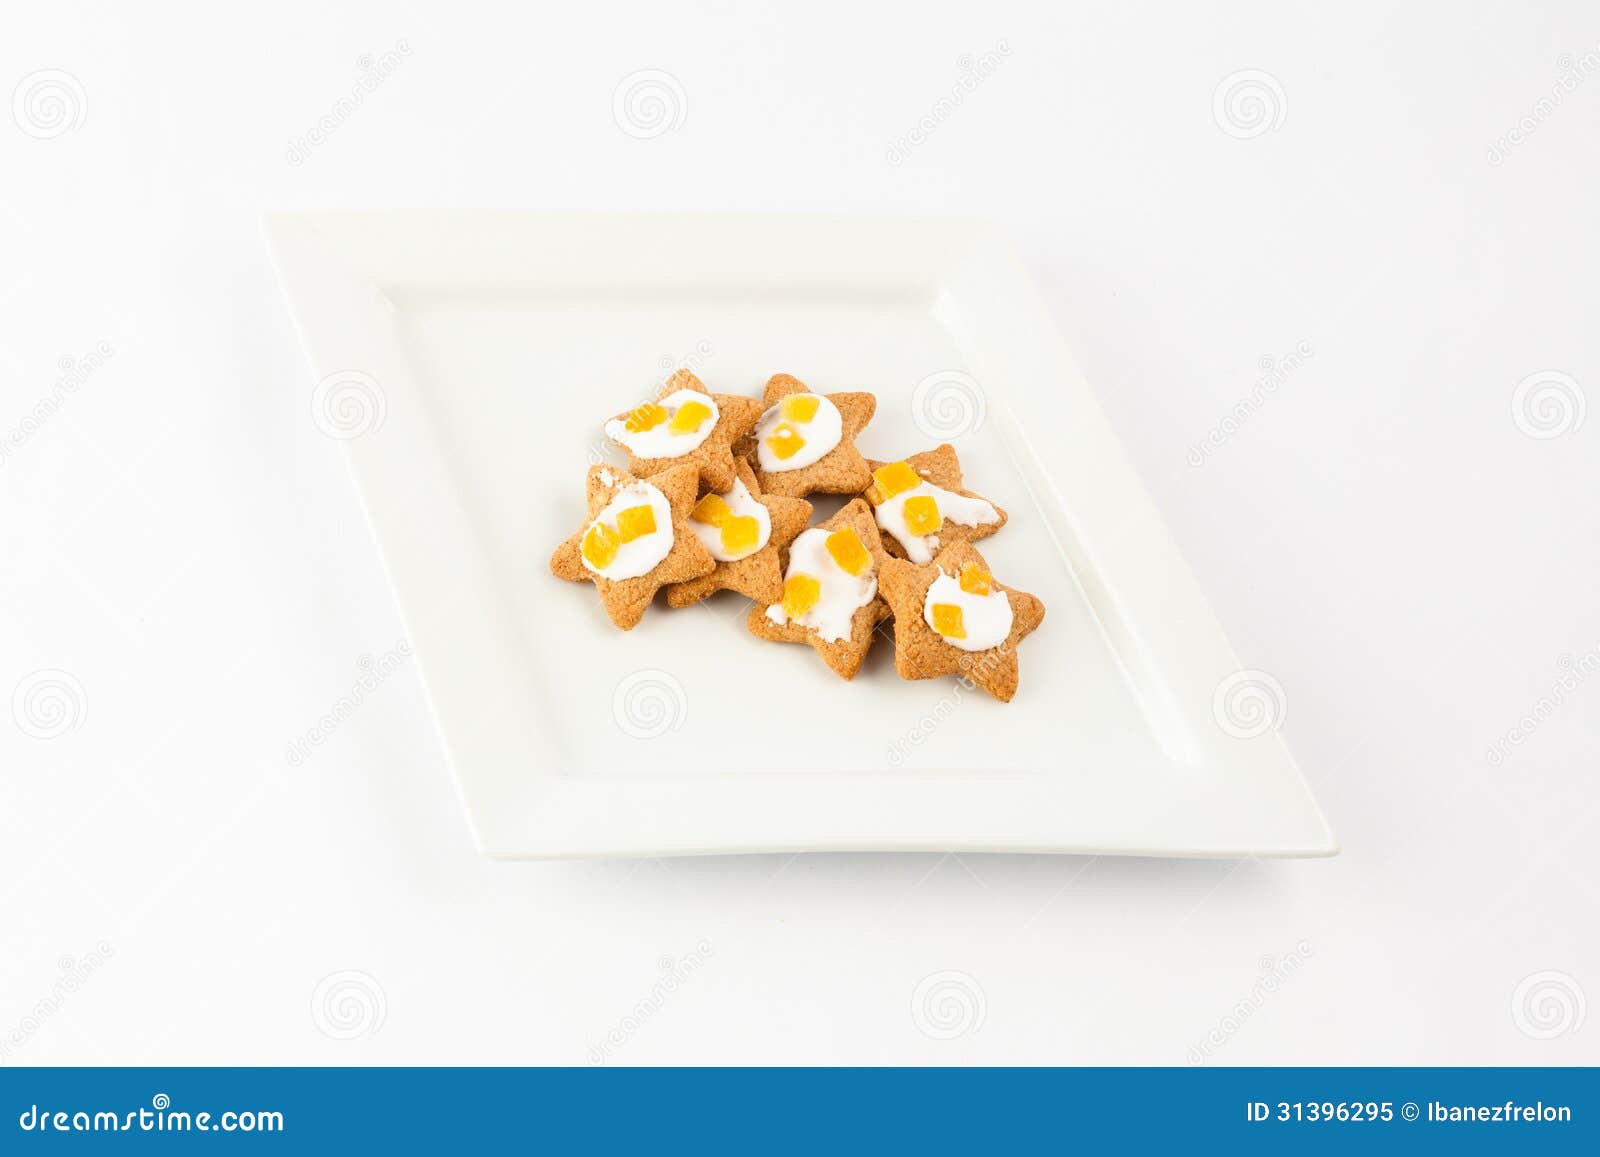 Savor the simplicity of these delightful star-shaped biscuits artfully arranged on a plate. Enjoy a moment of sweetness perfect for tea time or any cozy occasion. These homemade treats are a charming addition to your snack repertoire. Plate of decorative star shaped biscuits on plate with white background.